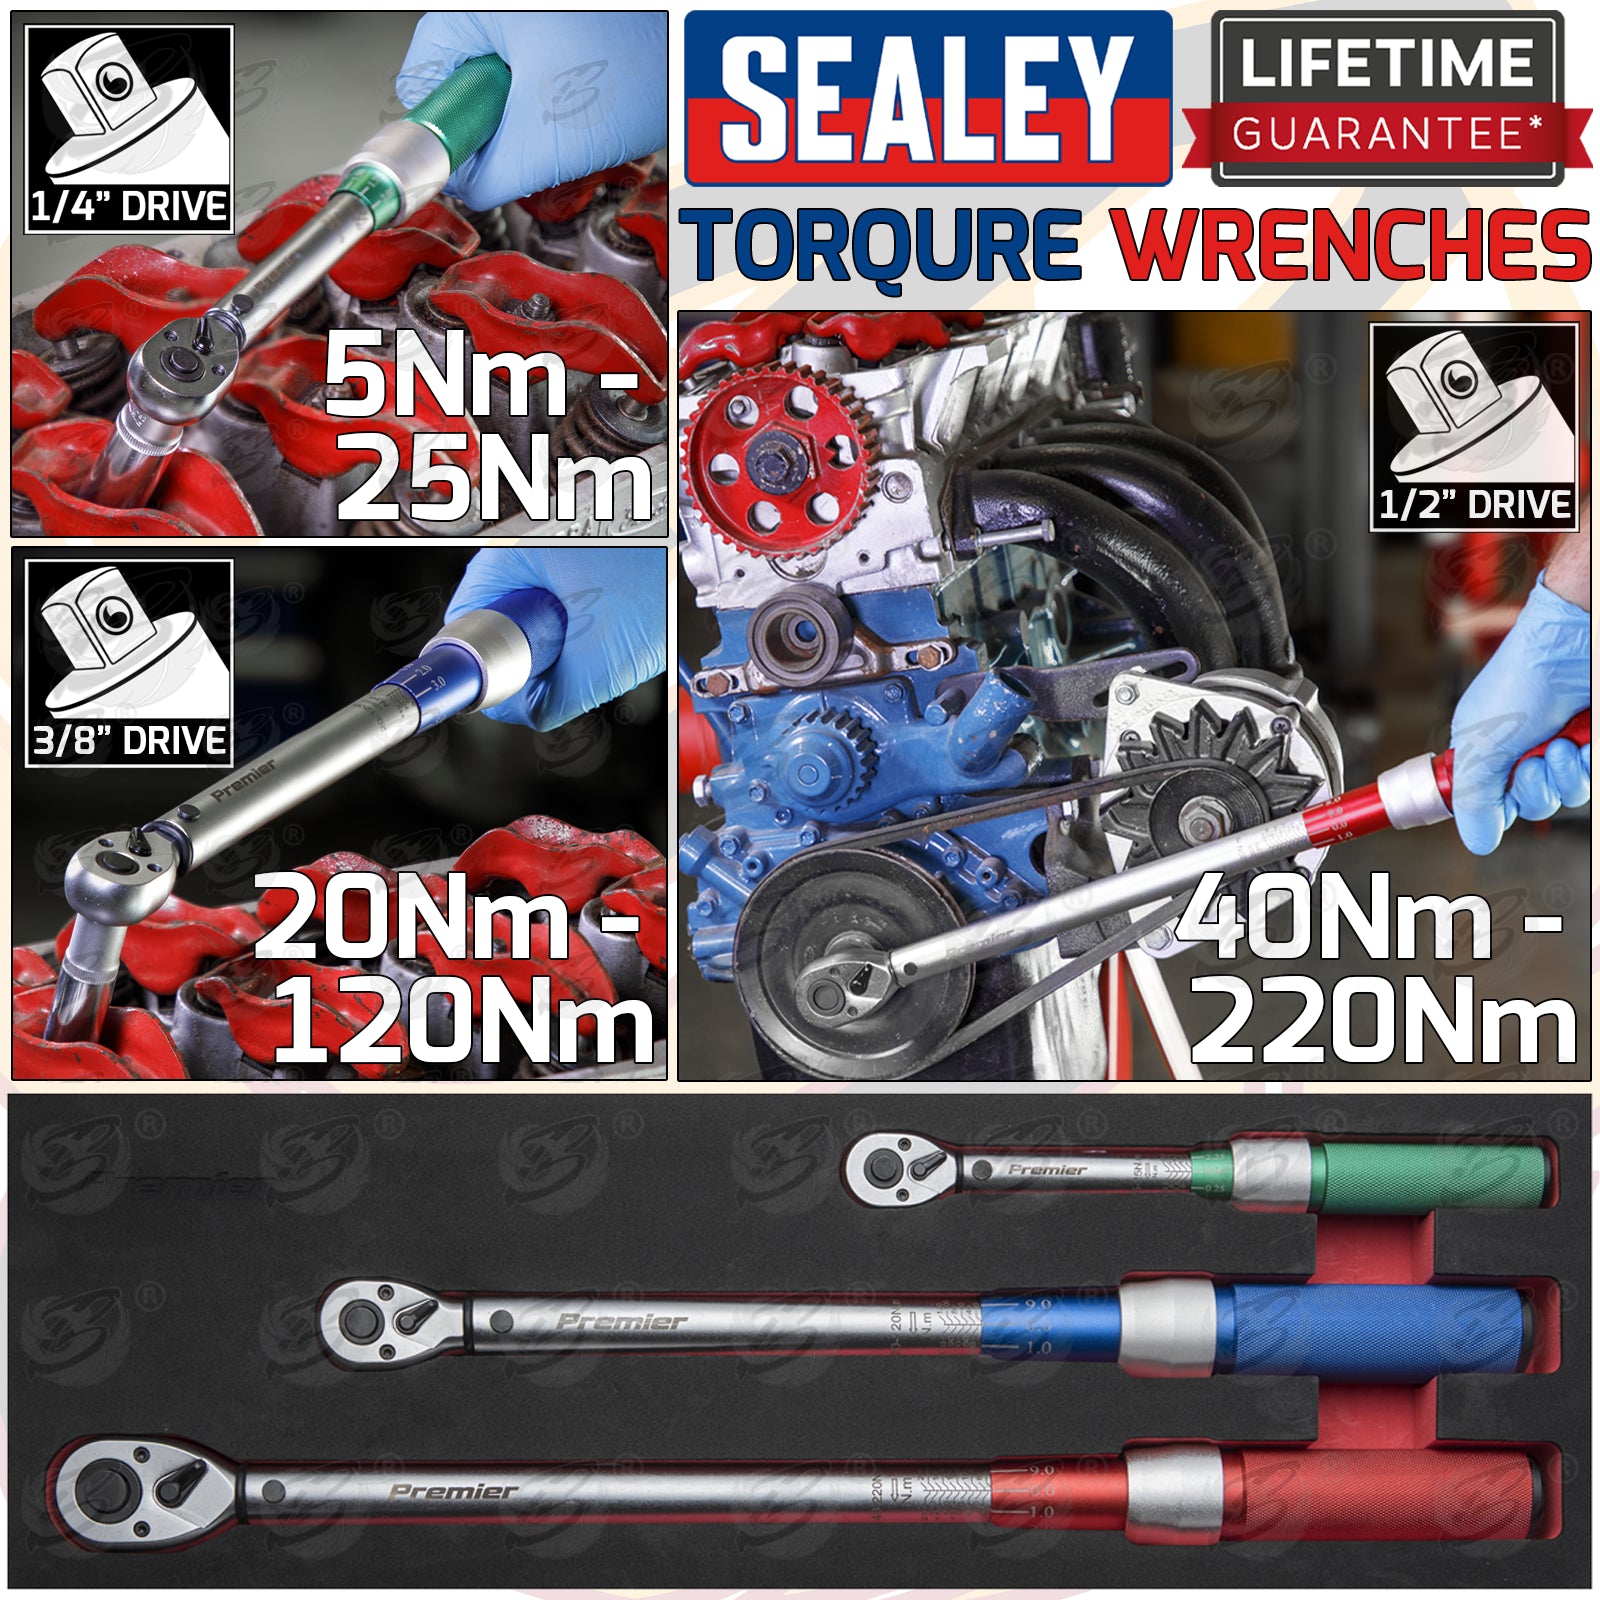 SEALEY 3PCS 1/4" & 3/8" & 1/2" DRIVE CALIBRATED TORQUE WRENCH SET